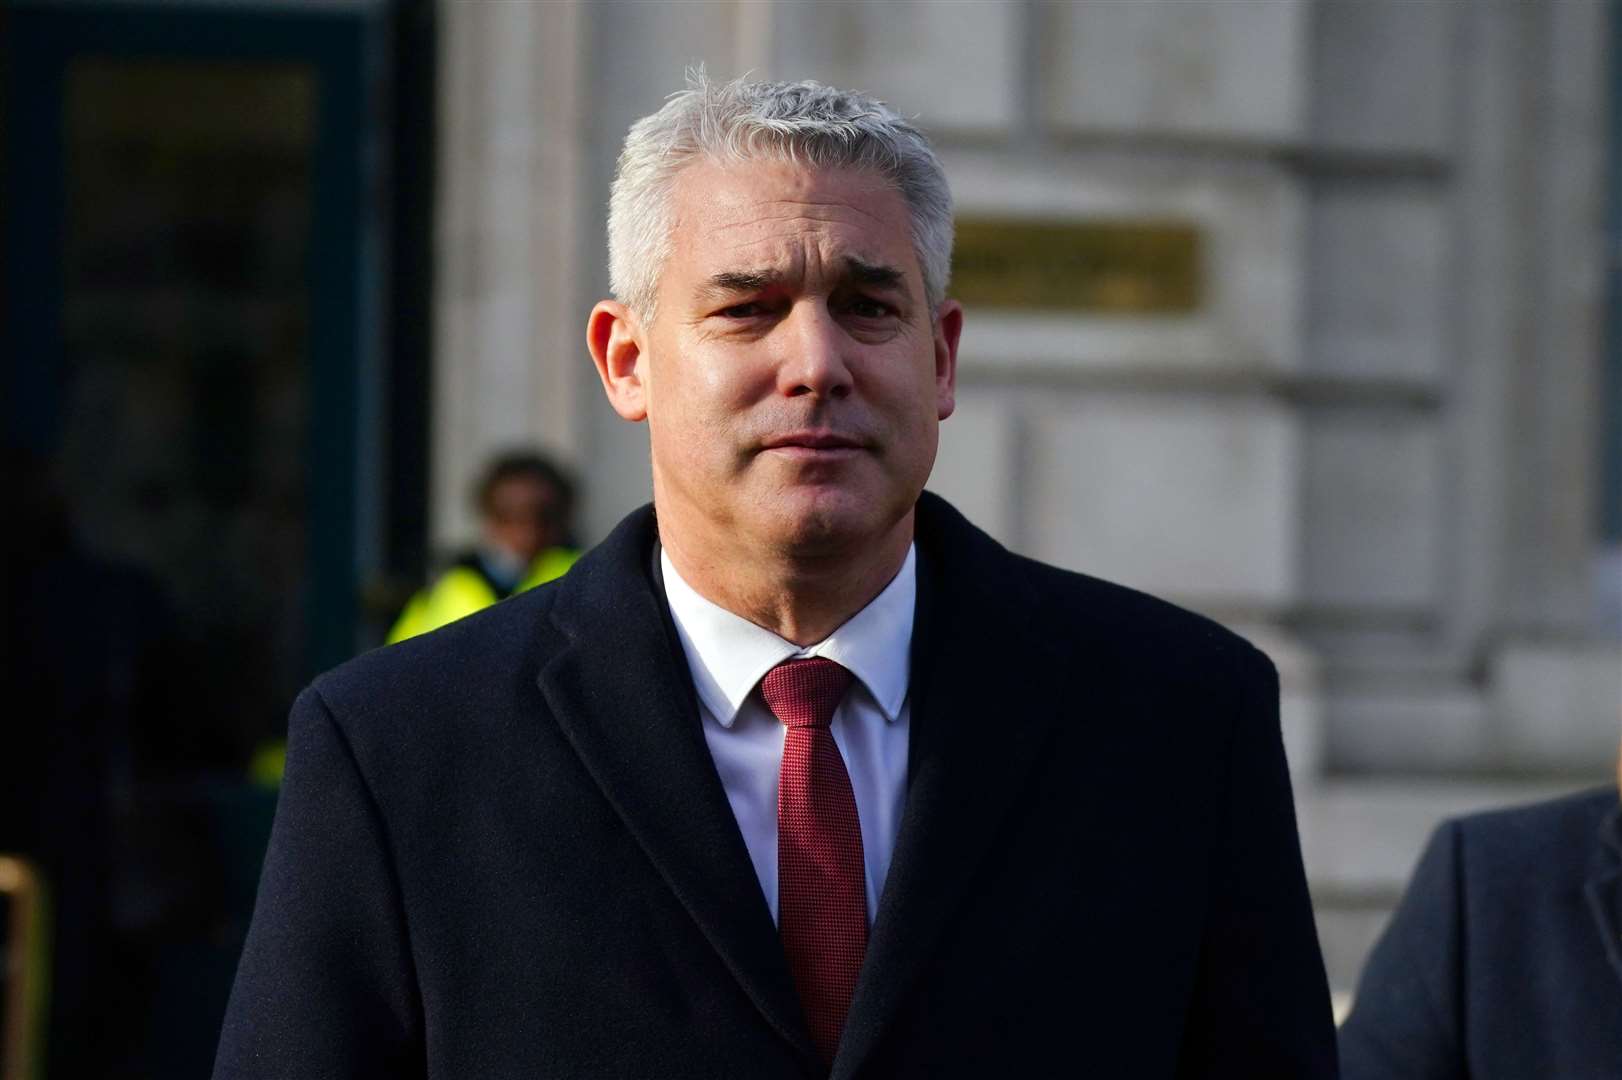 Health secretary Steve Barclay has urged the public to take ‘extra care’ as ambulance staff strike in support of a pay claim (Victoria Jones/PA)